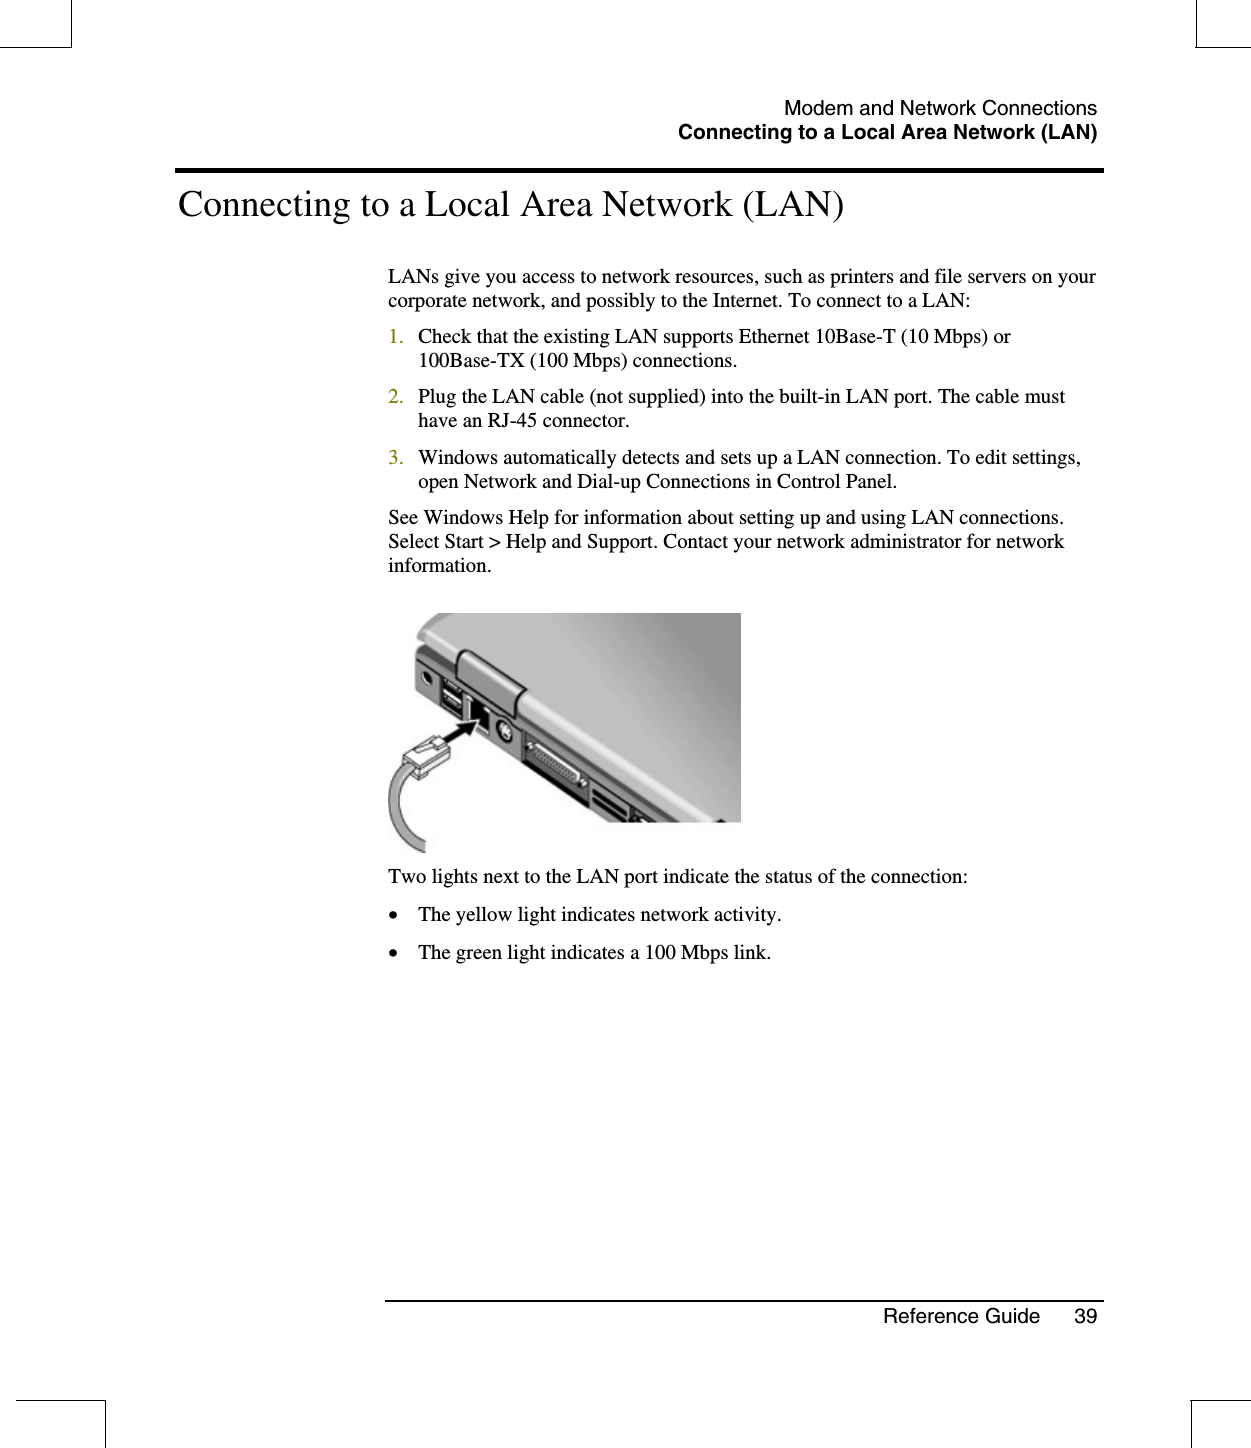 Modem and Network ConnectionsConnecting to a Local Area Network (LAN)Reference Guide 39Connecting to a Local Area Network (LAN)LANs give you access to network resources, such as printers and file servers on yourcorporate network, and possibly to the Internet. To connect to a LAN:1. Check that the existing LAN supports Ethernet 10Base-T (10 Mbps) or100Base-TX (100 Mbps) connections.2. Plug the LAN cable (not supplied) into the built-in LAN port. The cable musthave an RJ-45 connector.3. Windows automatically detects and sets up a LAN connection. To edit settings,open Network and Dial-up Connections in Control Panel.See Windows Help for information about setting up and using LAN connections.Select Start &gt; Help and Support. Contact your network administrator for networkinformation.Two lights next to the LAN port indicate the status of the connection:•  The yellow light indicates network activity.•  The green light indicates a 100 Mbps link.